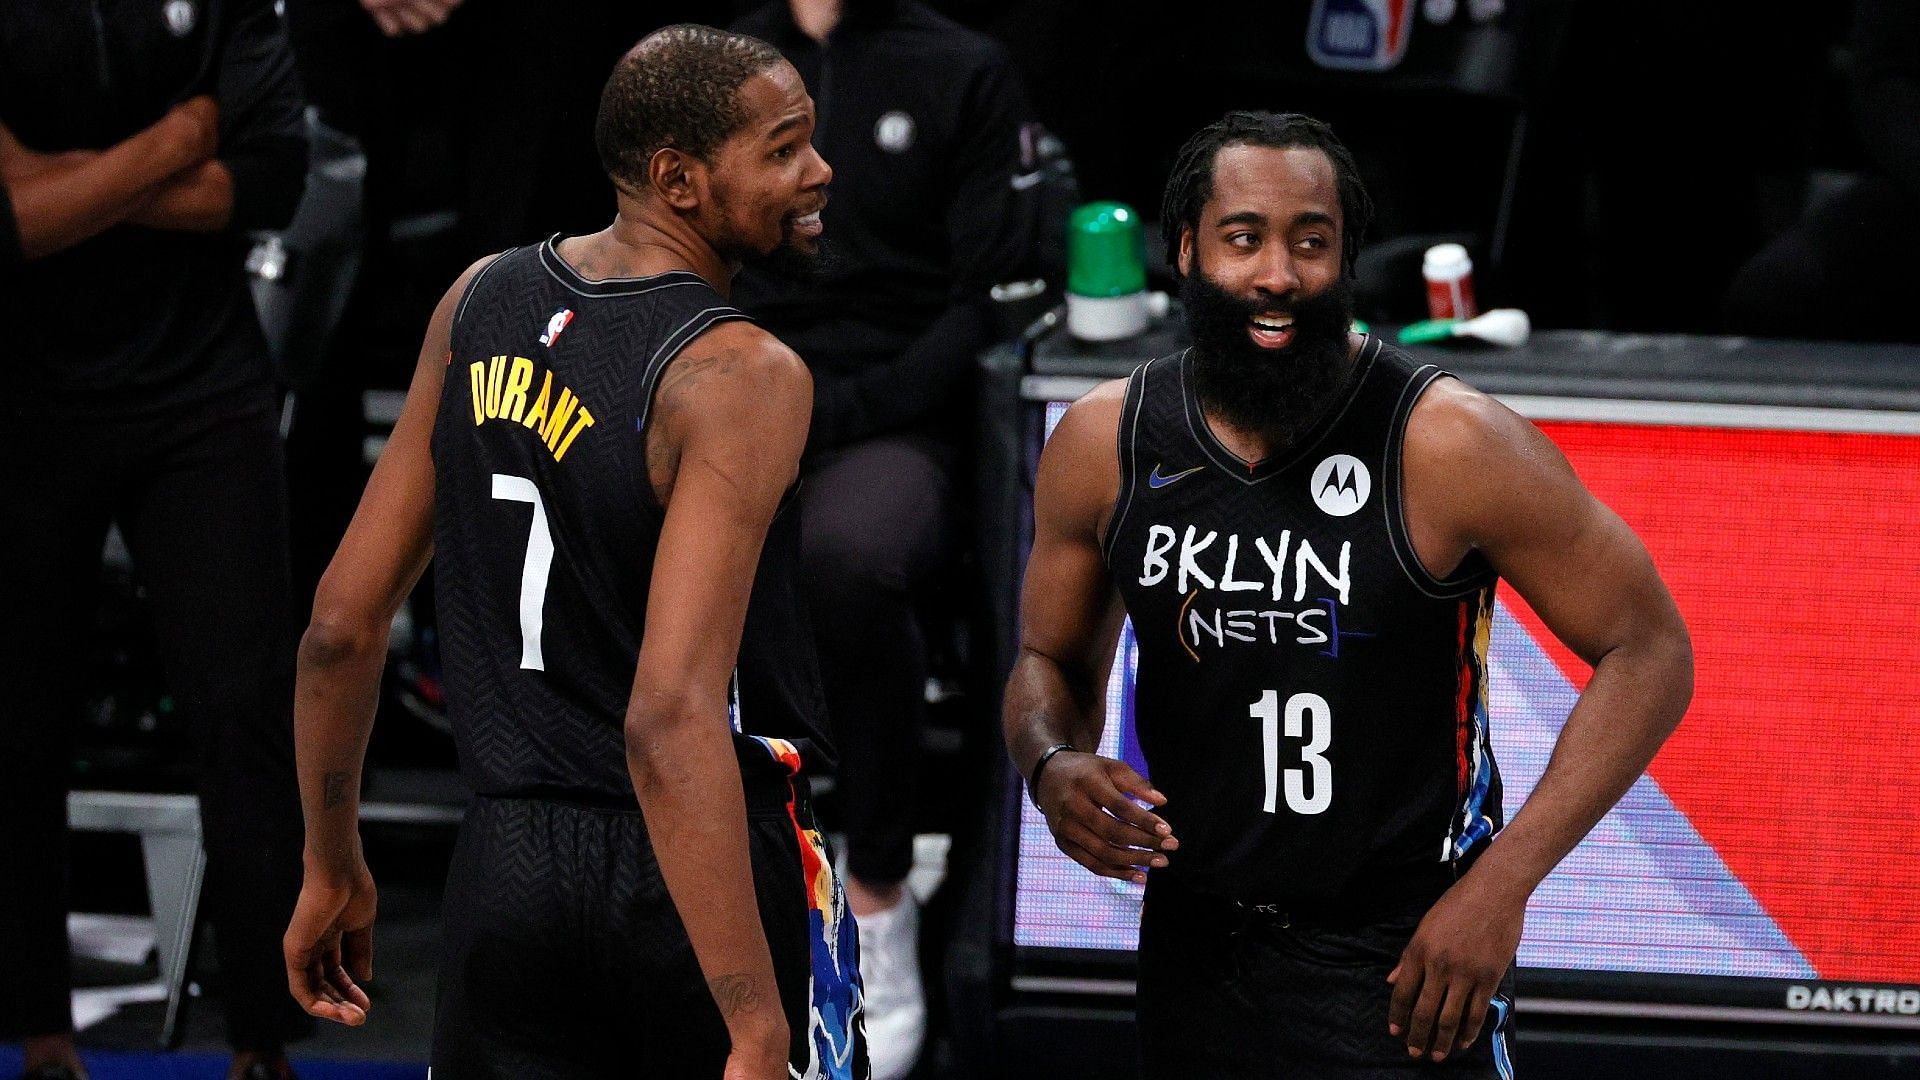 The Brooklyn Nets are off to a rocky start in the 2021-22 NBA season [Photo: Sporting News] Steve Nash is tryng to lead the Brooklyn Nets out of an early funk. Could Joe Harris and Blake Griffin be in the middle of a slump for the Brooklyn Nets? James Harden&#039;s struggles with the Brooklyn Nets this season are so apparent after years of dominance.